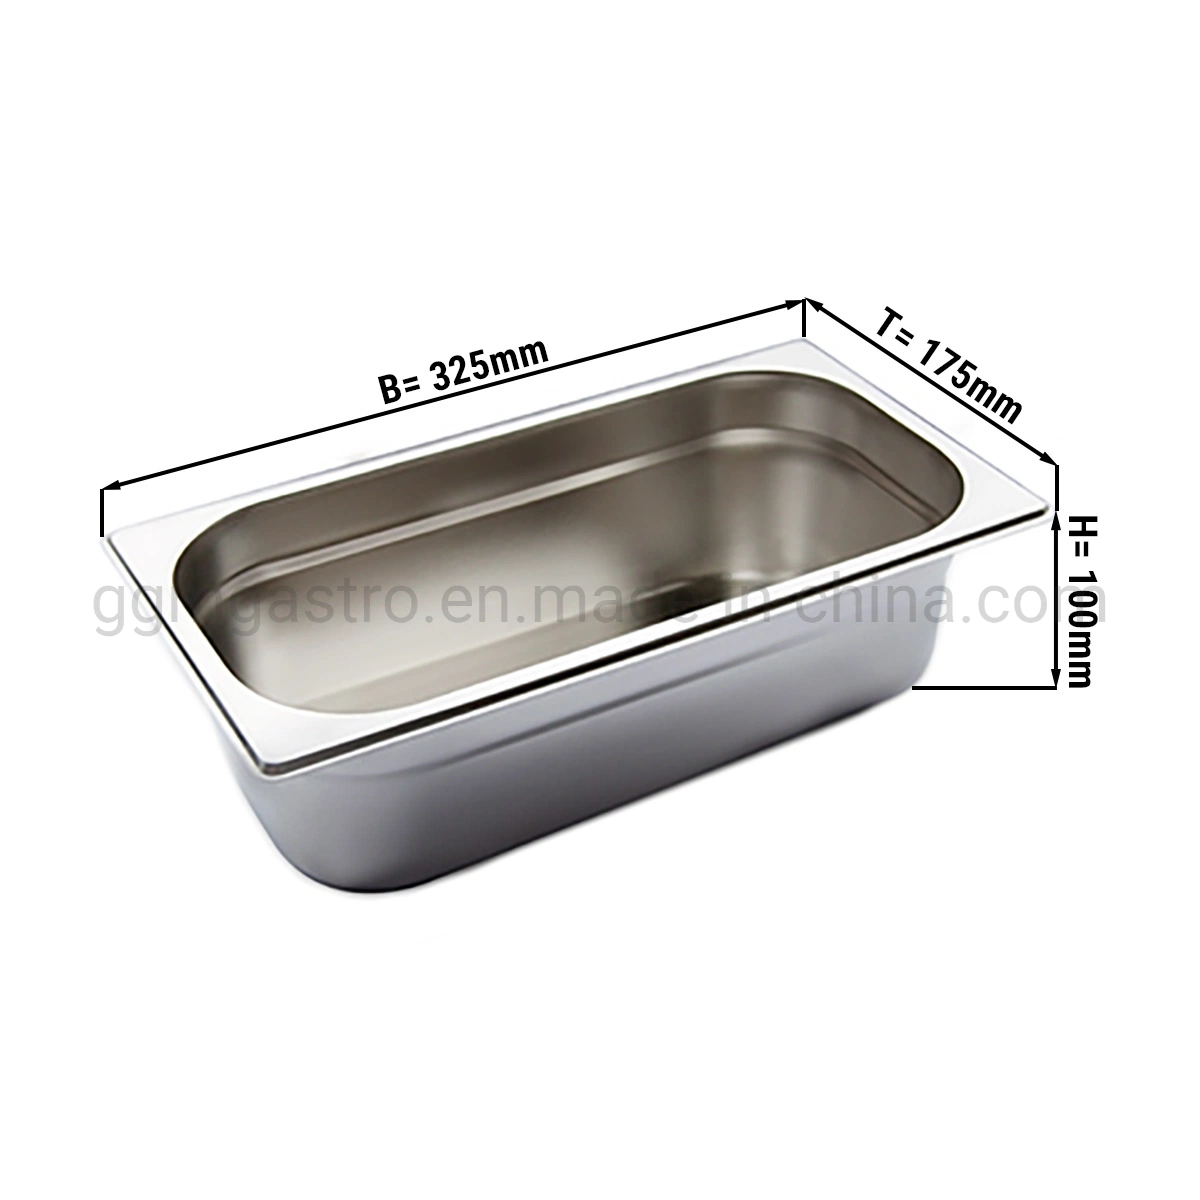 Wholesale Hotel and Restaurant Supplies Food Container Stainless Steel Gn Pan